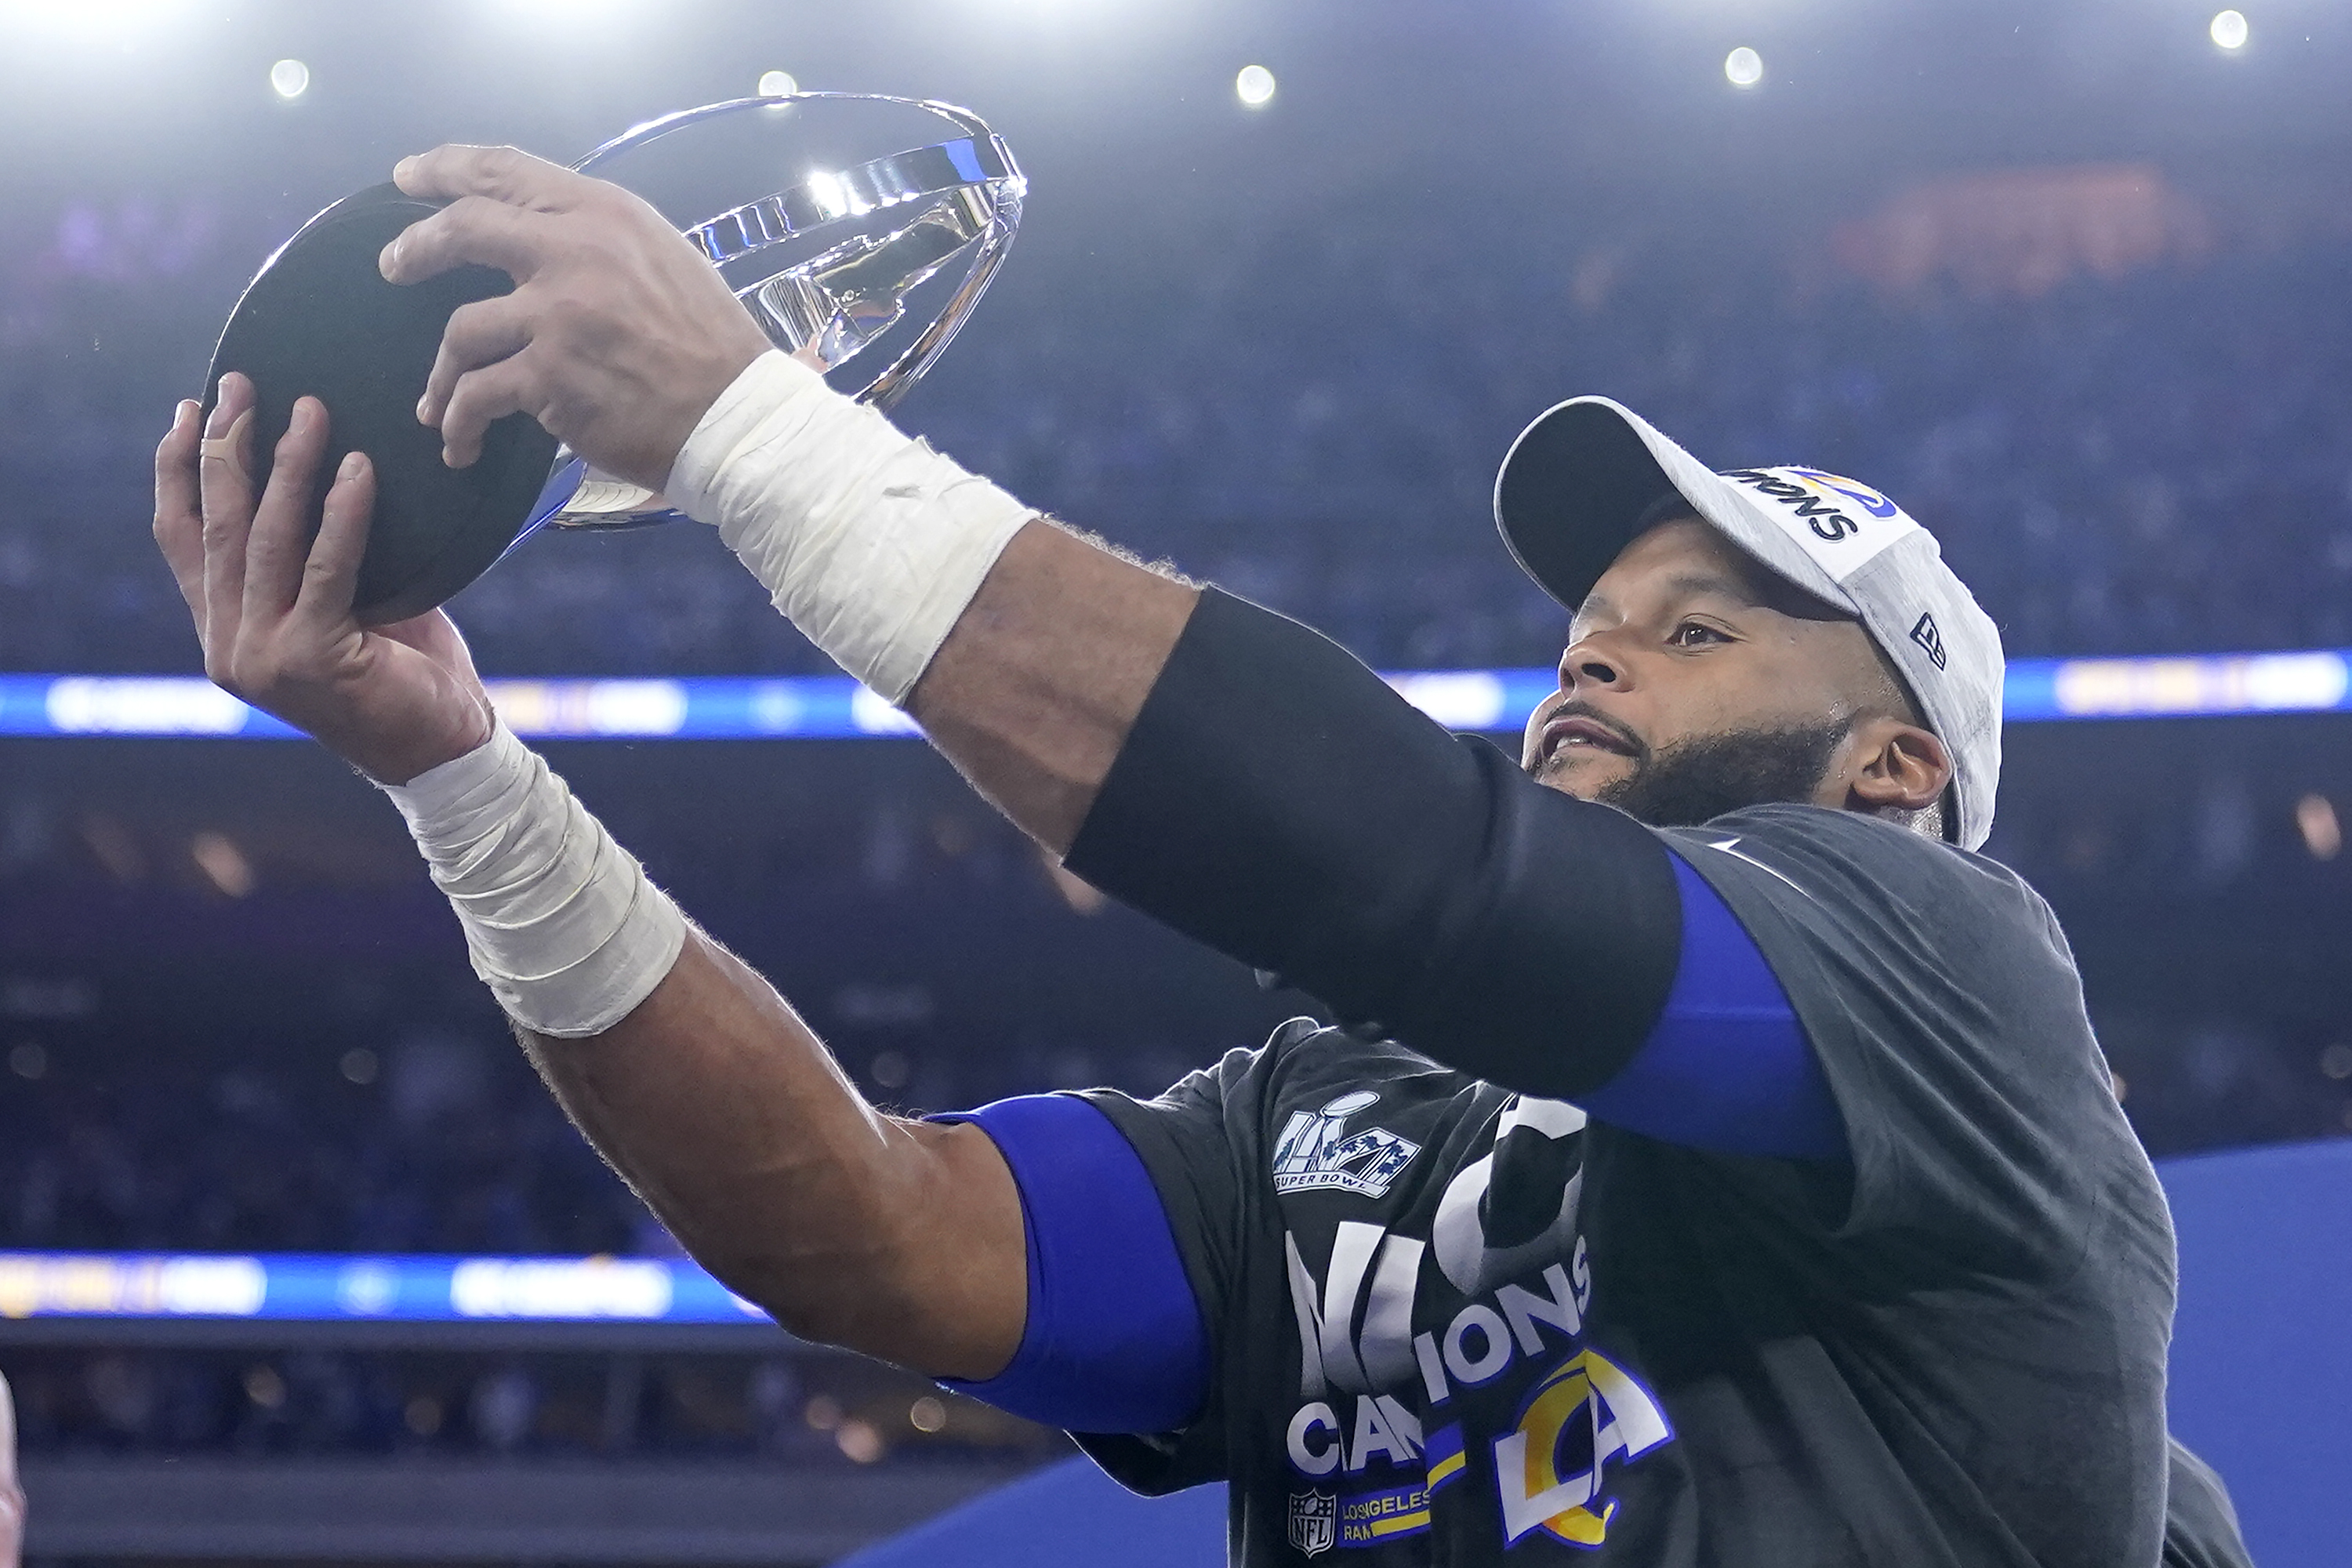 Los Angeles Rams presented with George Halas trophy after winning NFC  Championship